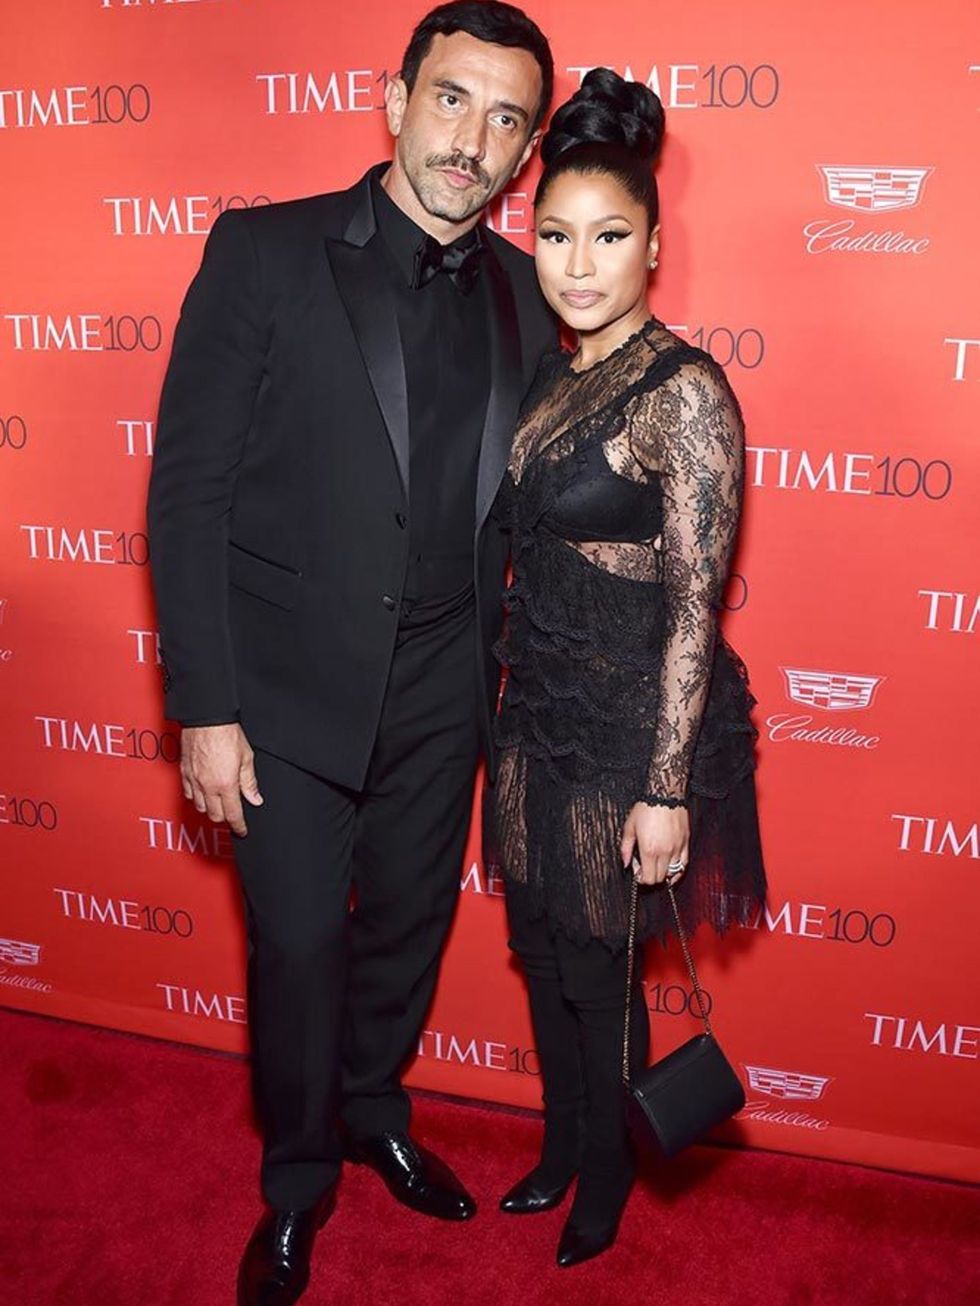 Riccardo Tisci and Nicki Minaj attend the 2016 Time 100 Most Influential People In The World Gala in New York, April 2016.